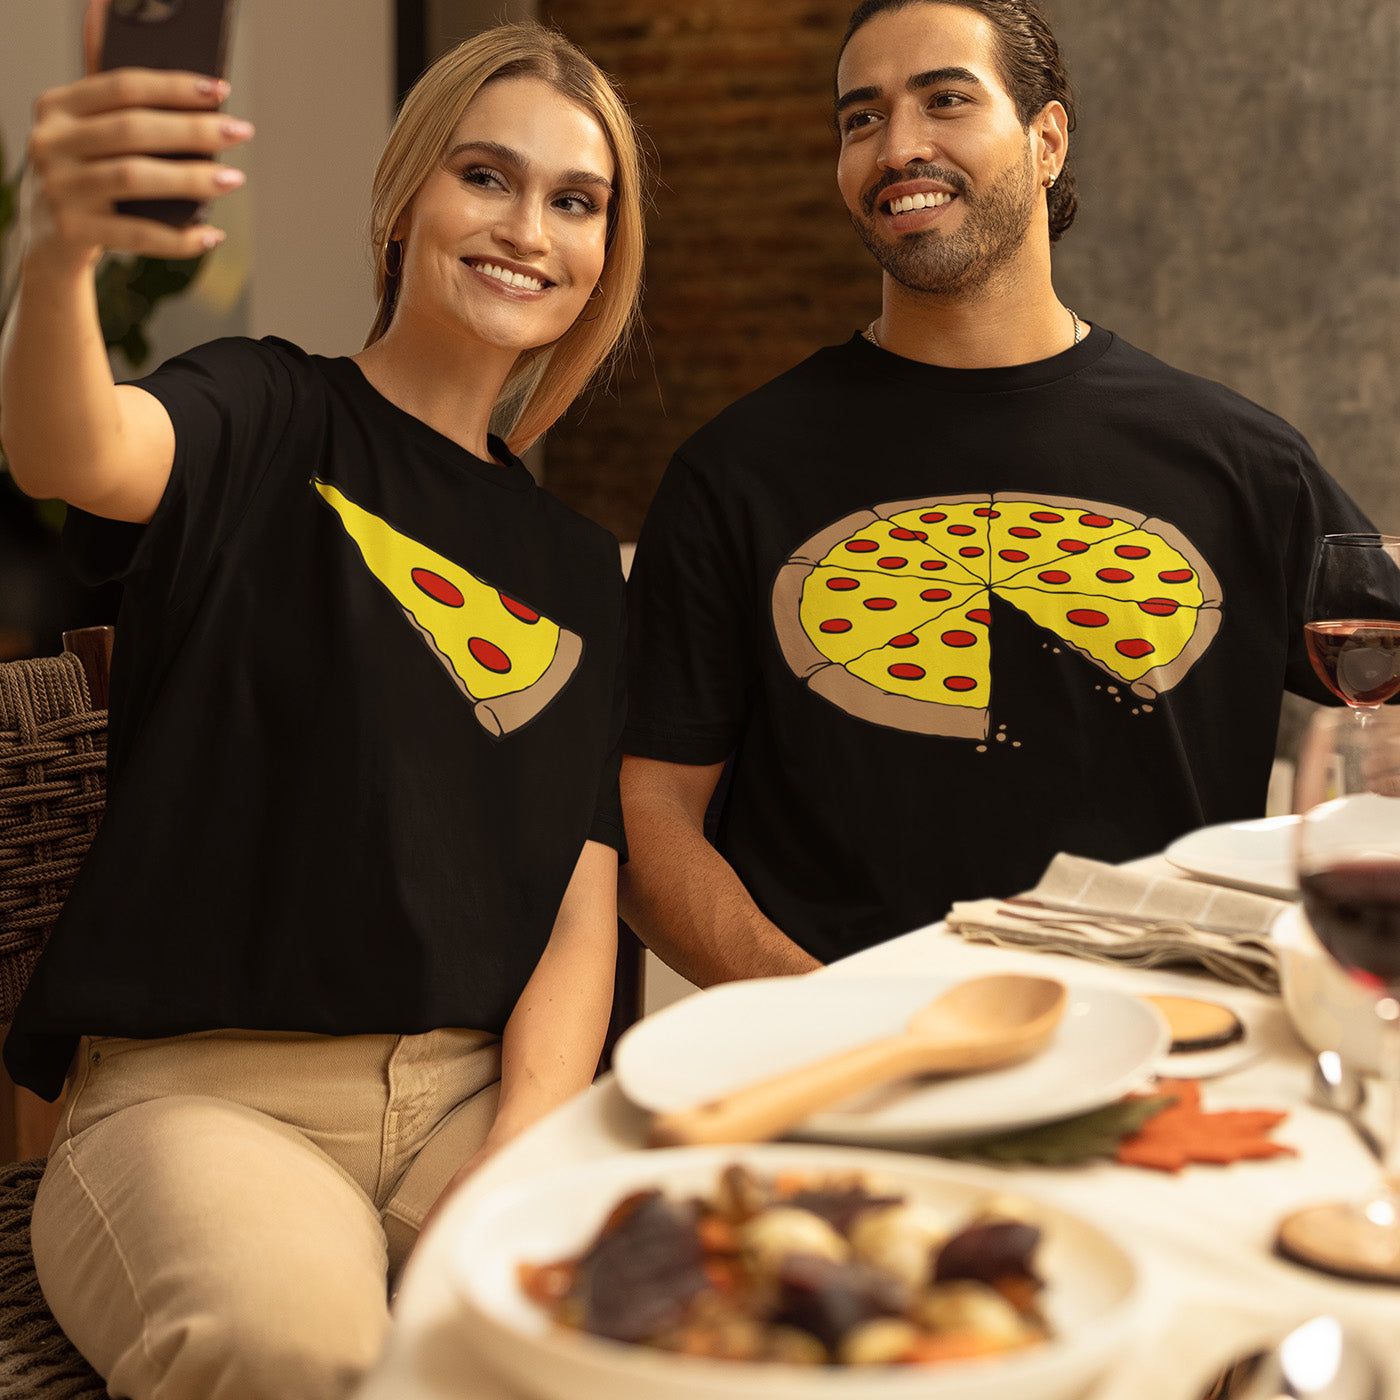 Couple Matching Outfit for Pizza Date